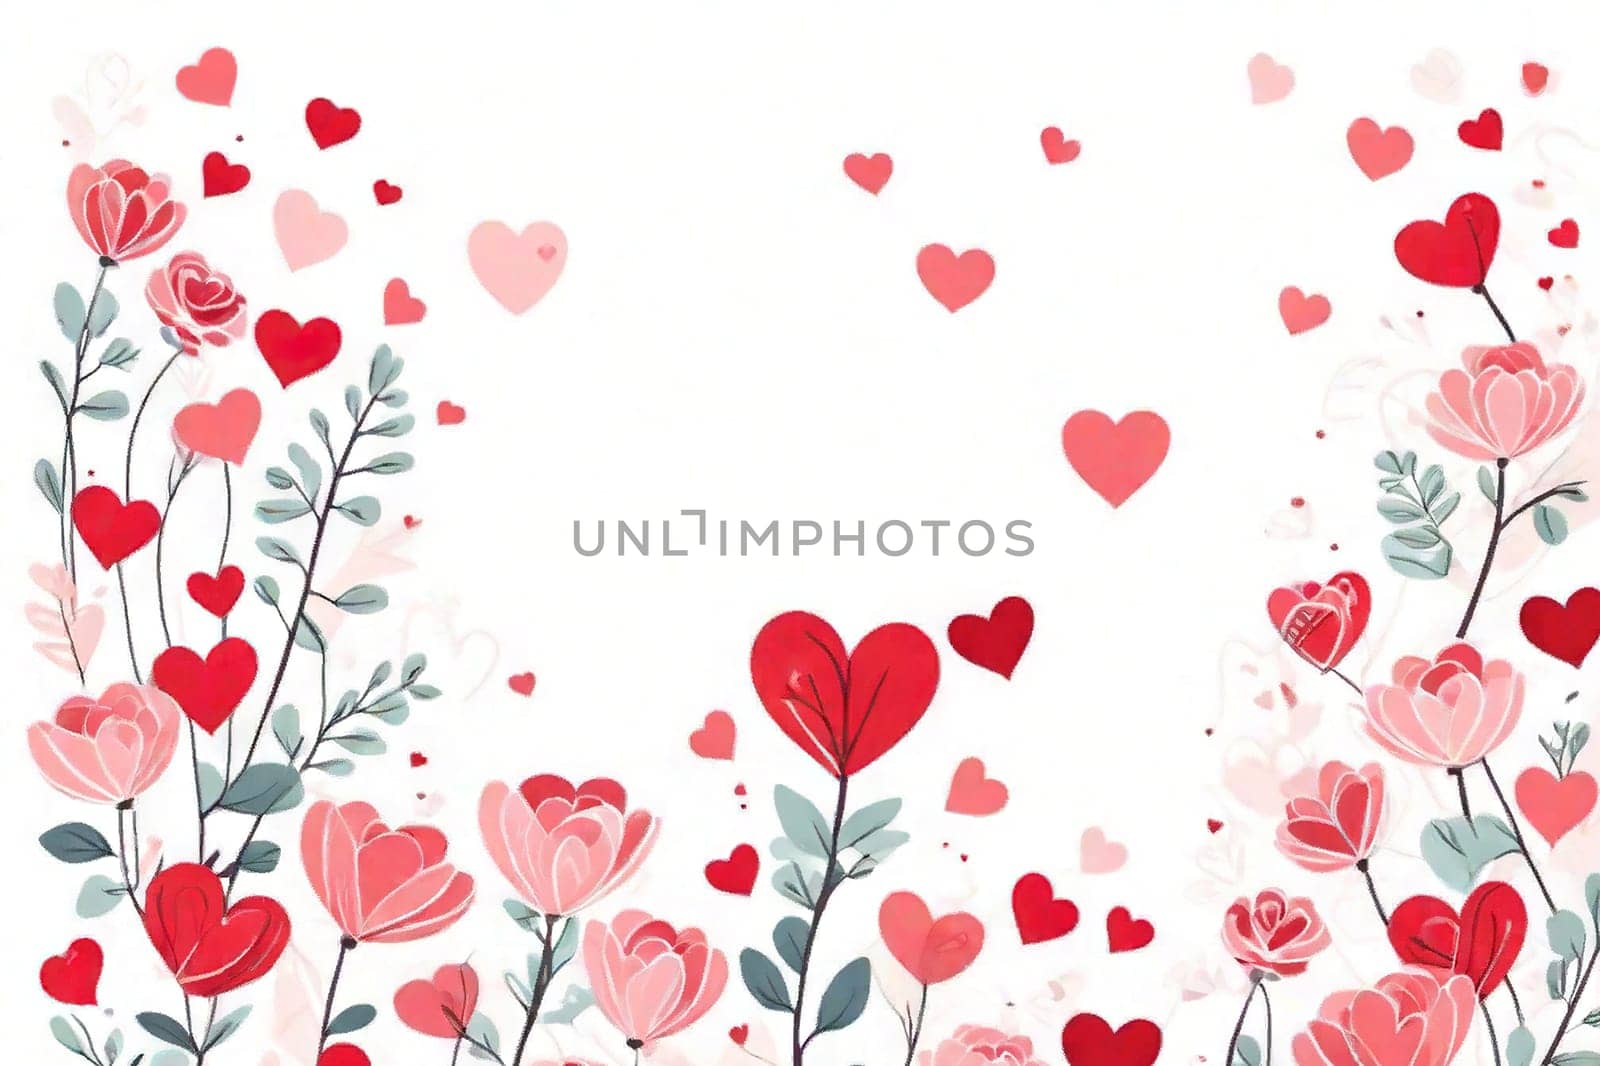 Romantic card for valentine's day and mother's day, festive mood red hearts and flowers on a white background